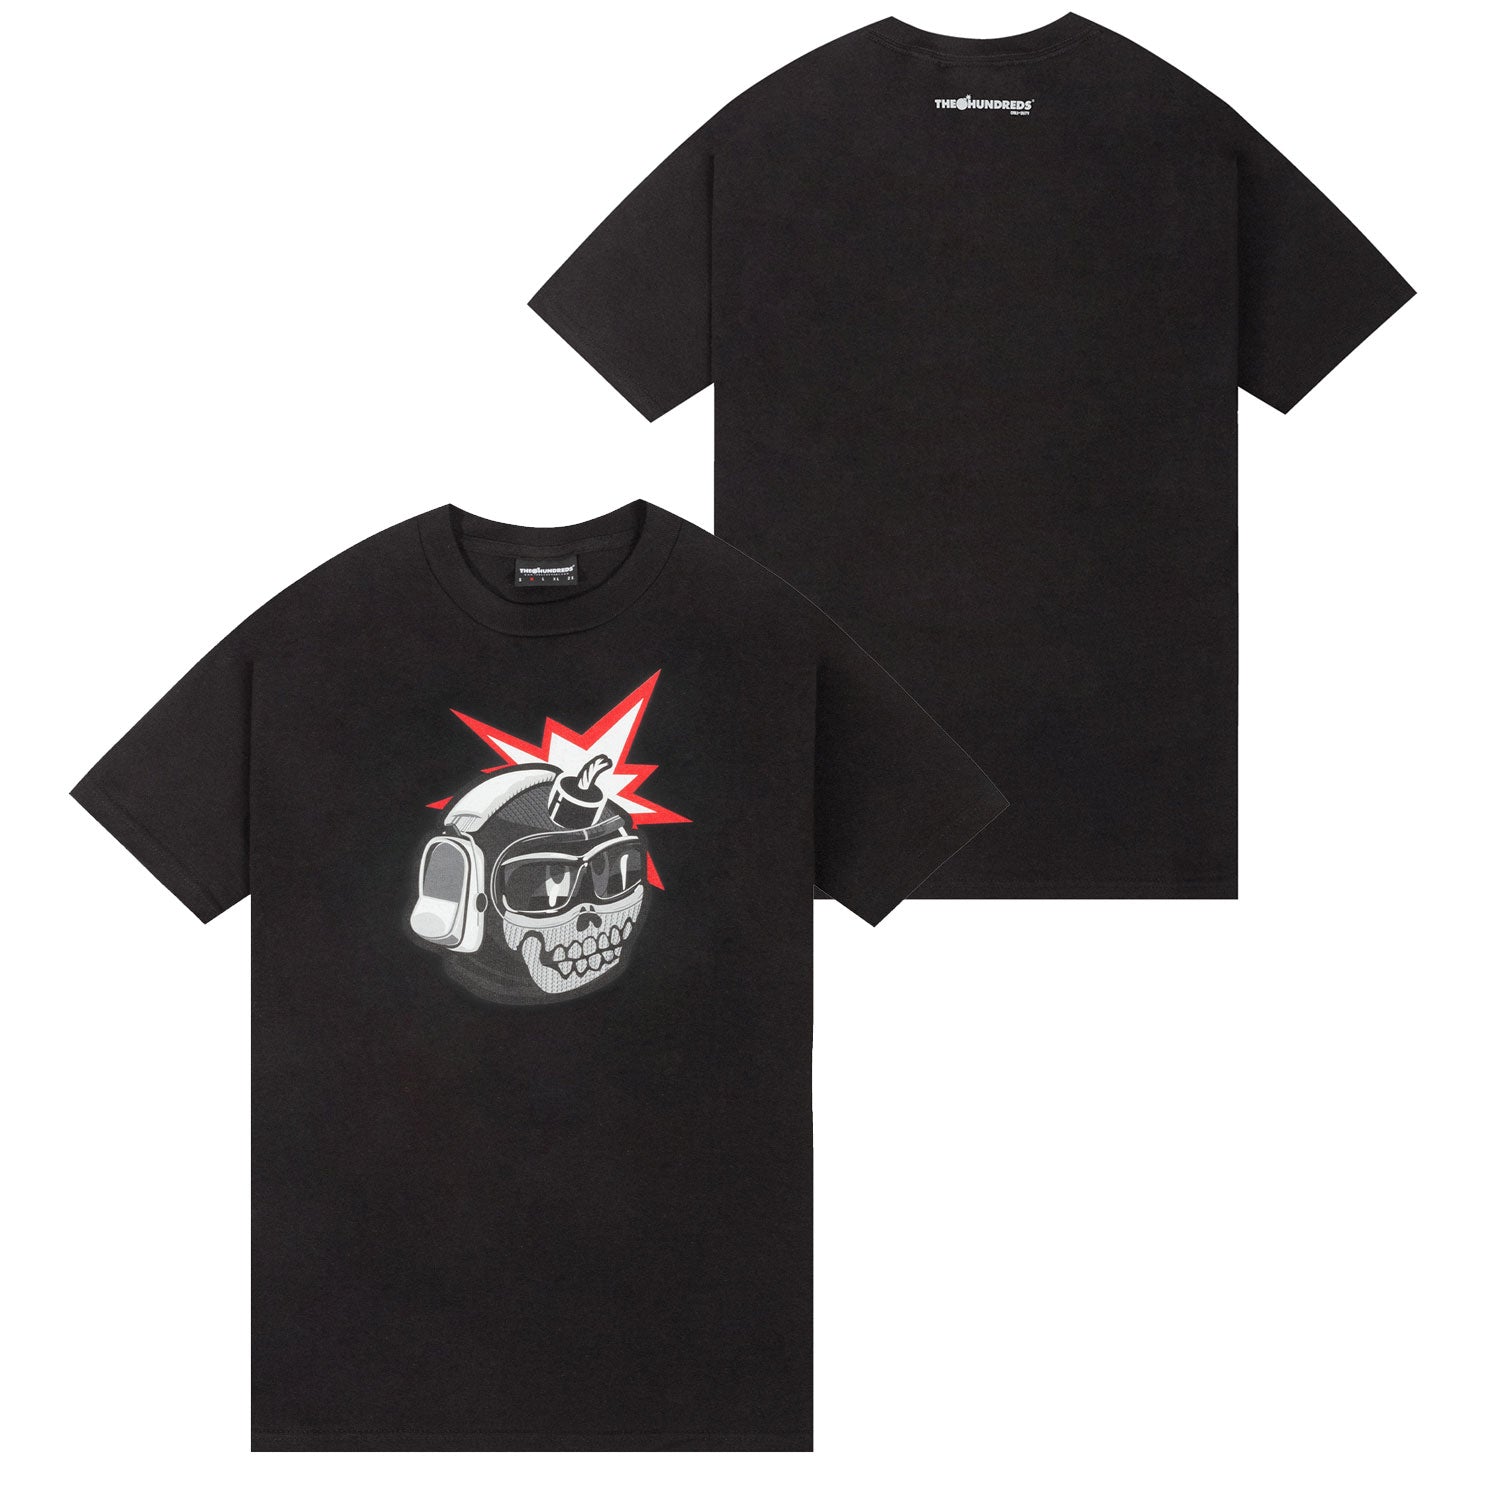 Call of Duty The Hundreds Homebase Black T-Shirt - front and back views